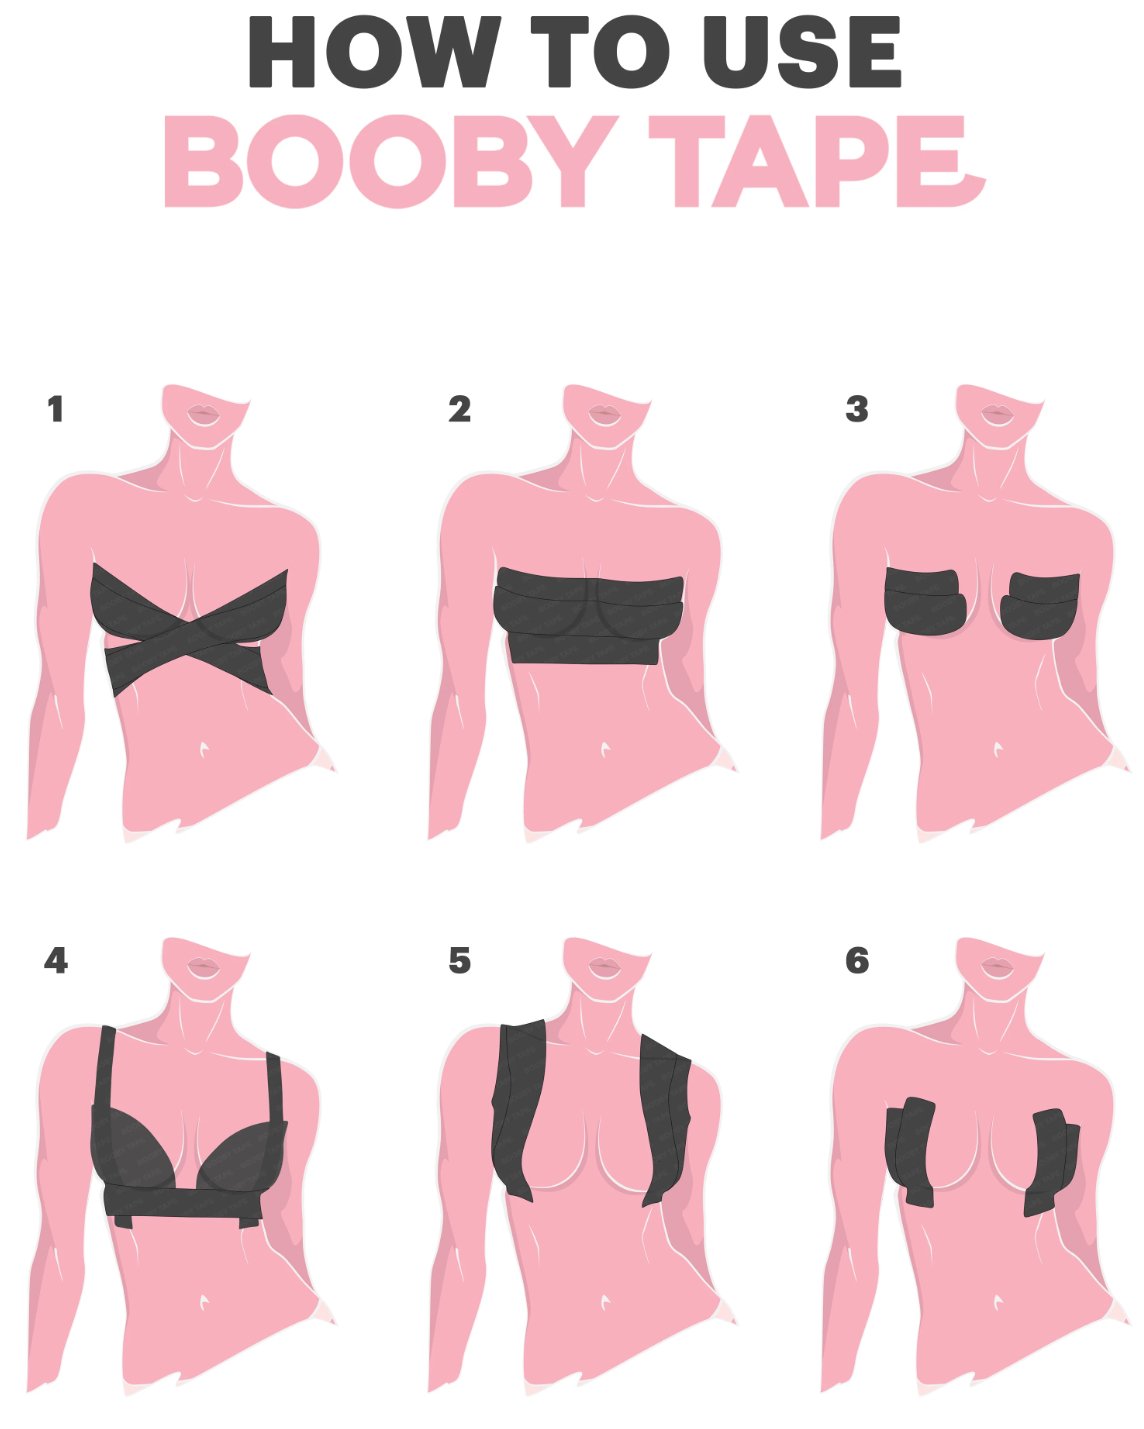 Shop Booby Tape Black - Booby Tape